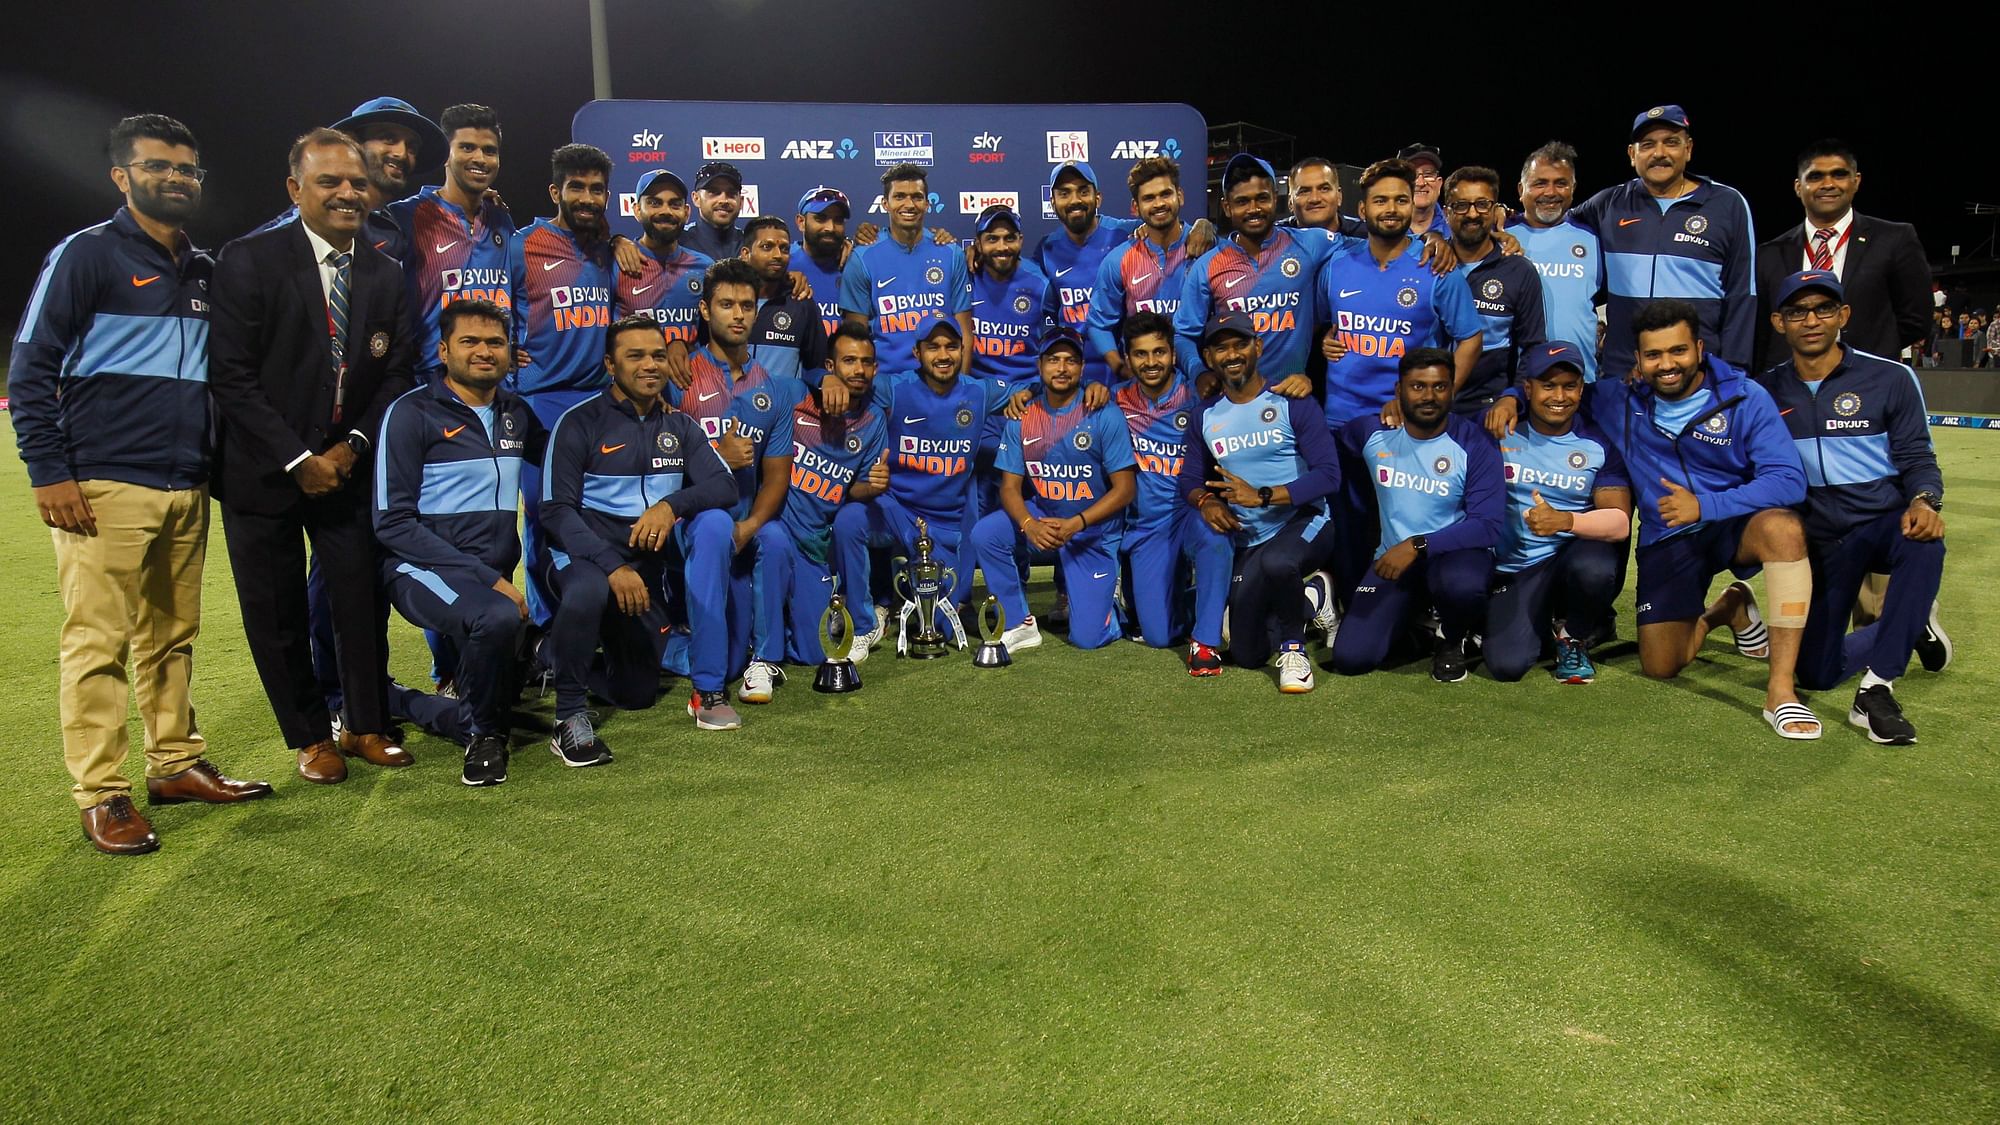 On Sunday, India became the first team to whitewash the Kiwis in their own backyard in a T20I series.